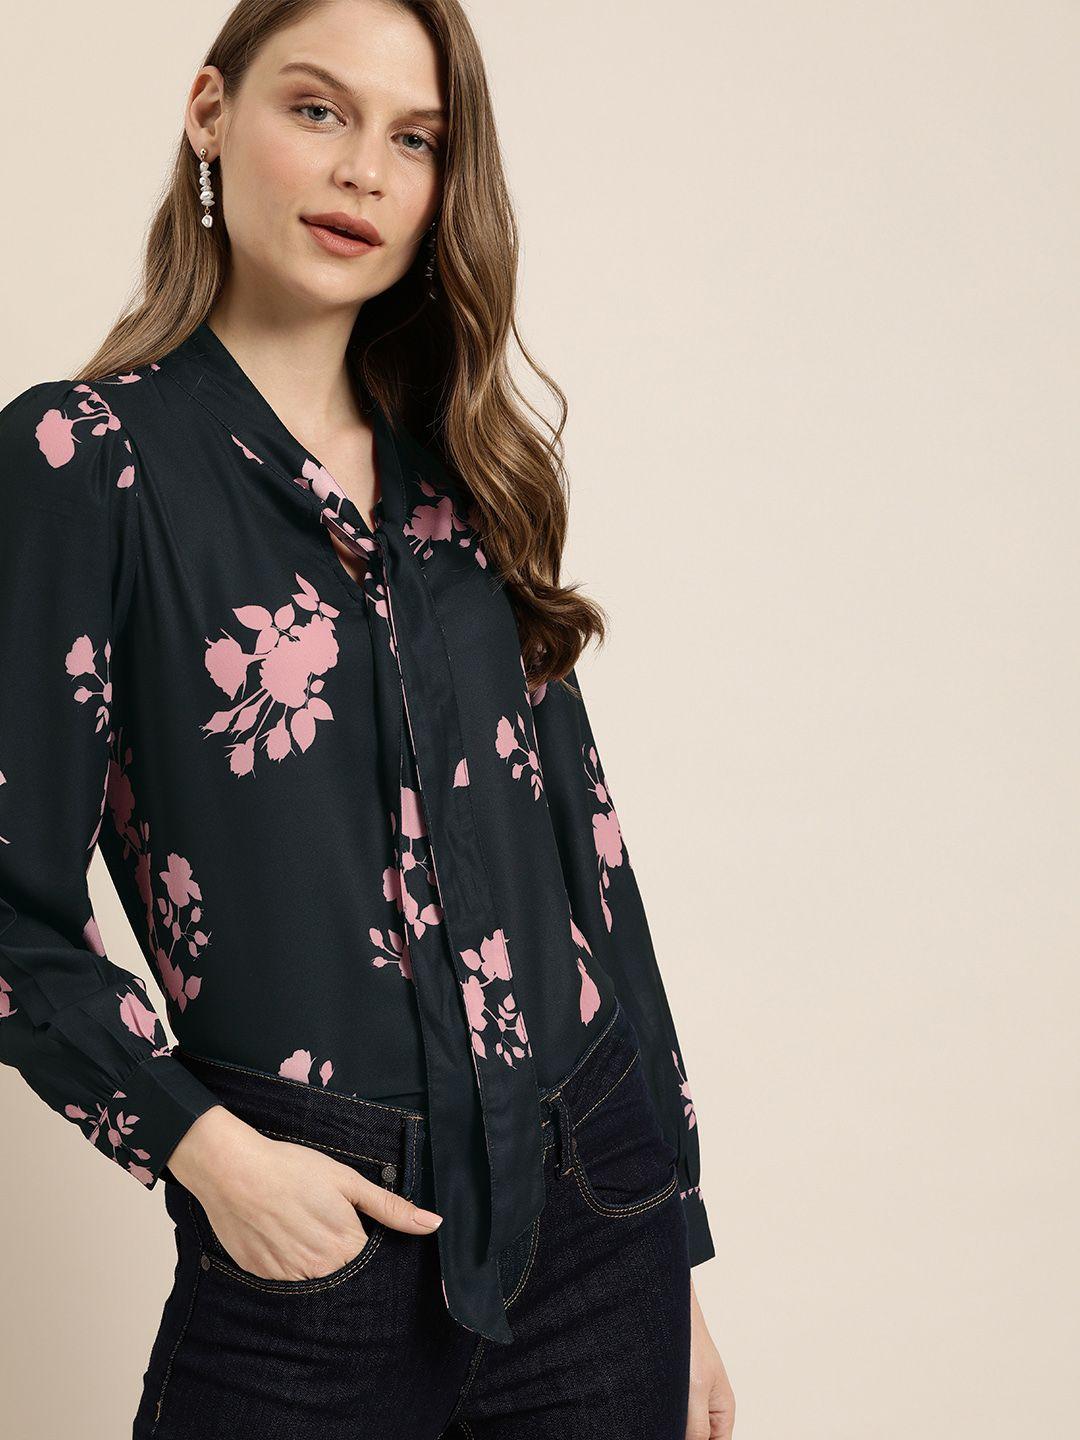 her by invictus navy blue floral cuffed sleeves top with tie-up neck